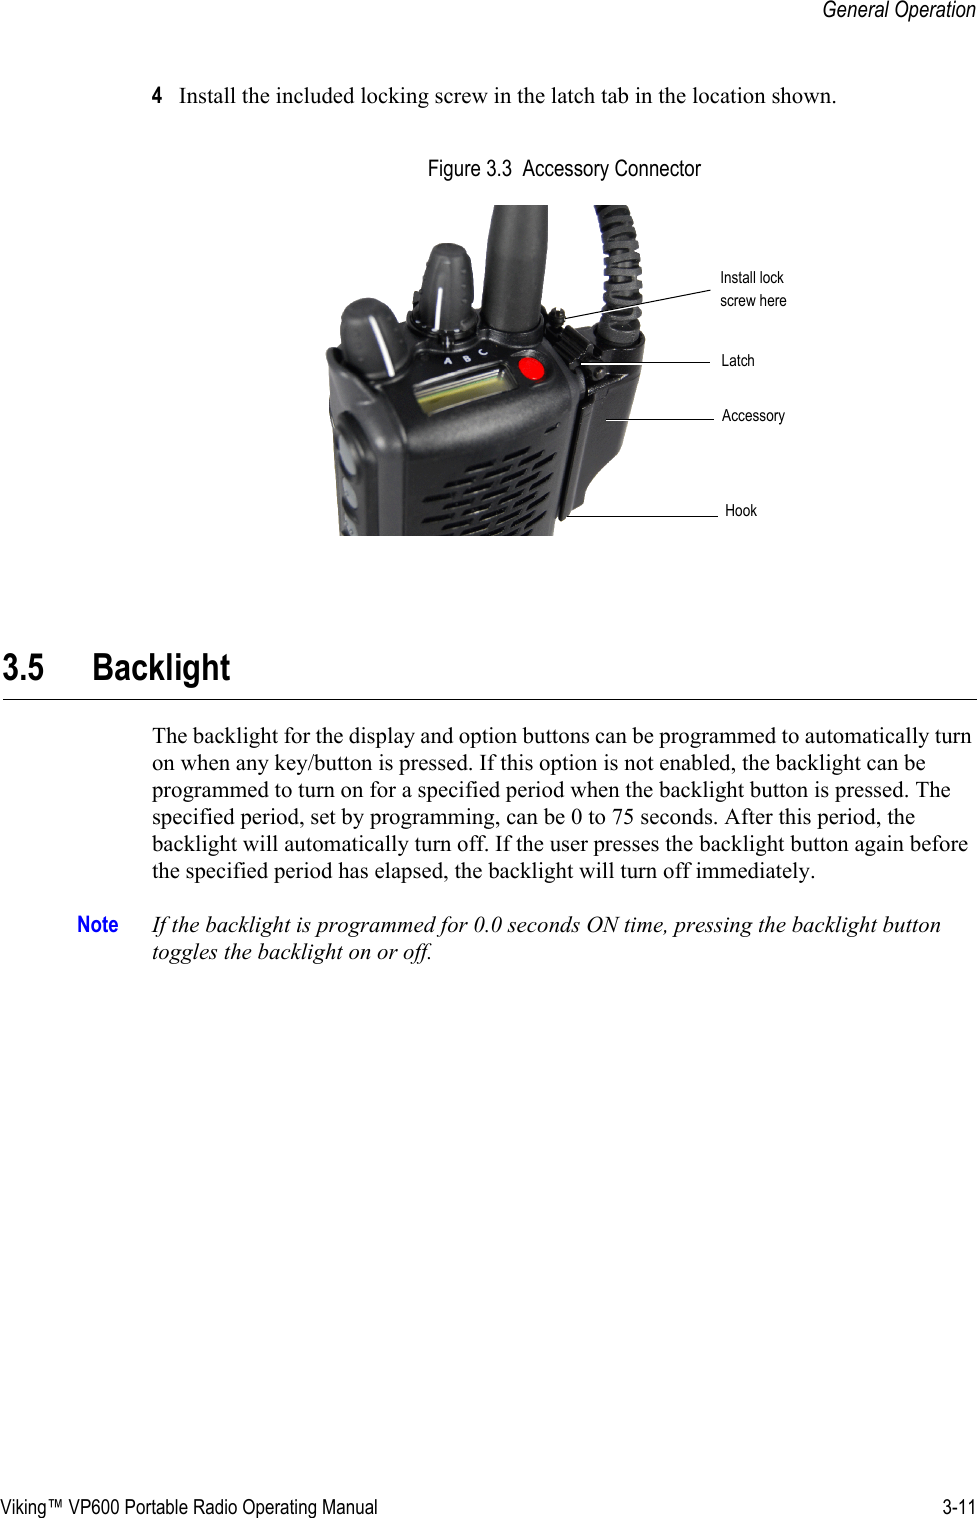 Viking™ VP600 Portable Radio Operating Manual 3-11General Operation4Install the included locking screw in the latch tab in the location shown. Figure 3.3  Accessory Connector3.5 BacklightThe backlight for the display and option buttons can be programmed to automatically turn on when any key/button is pressed. If this option is not enabled, the backlight can be programmed to turn on for a specified period when the backlight button is pressed. The specified period, set by programming, can be 0 to 75 seconds. After this period, the backlight will automatically turn off. If the user presses the backlight button again before the specified period has elapsed, the backlight will turn off immediately.Note If the backlight is programmed for 0.0 seconds ON time, pressing the backlight button toggles the backlight on or off. Install lockscrew hereLatchAccessoryHook